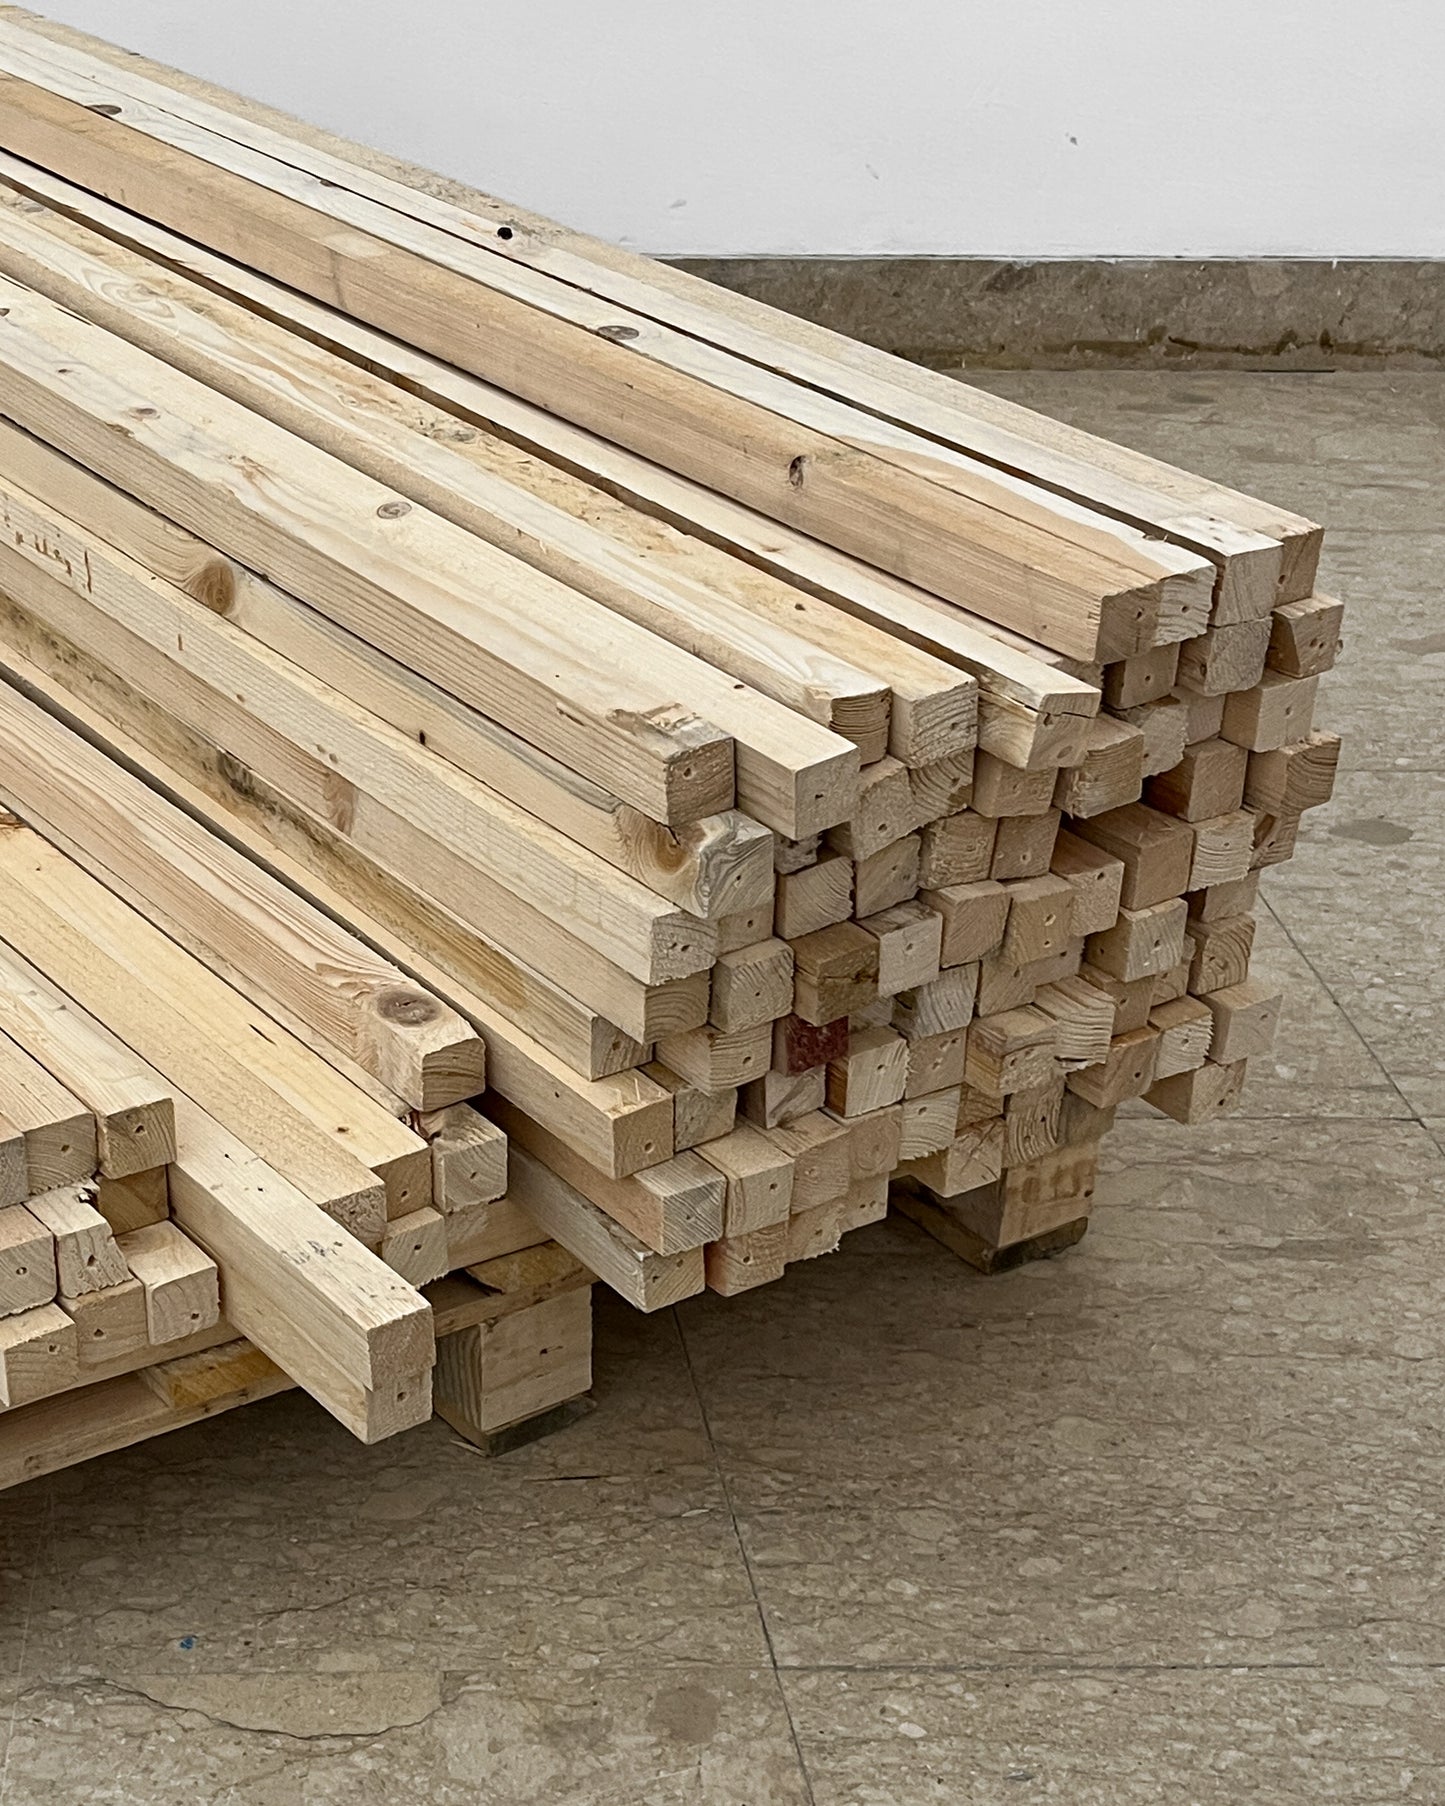 USED UP | Philippine Pavilion | Structural Timber, 1.18.1